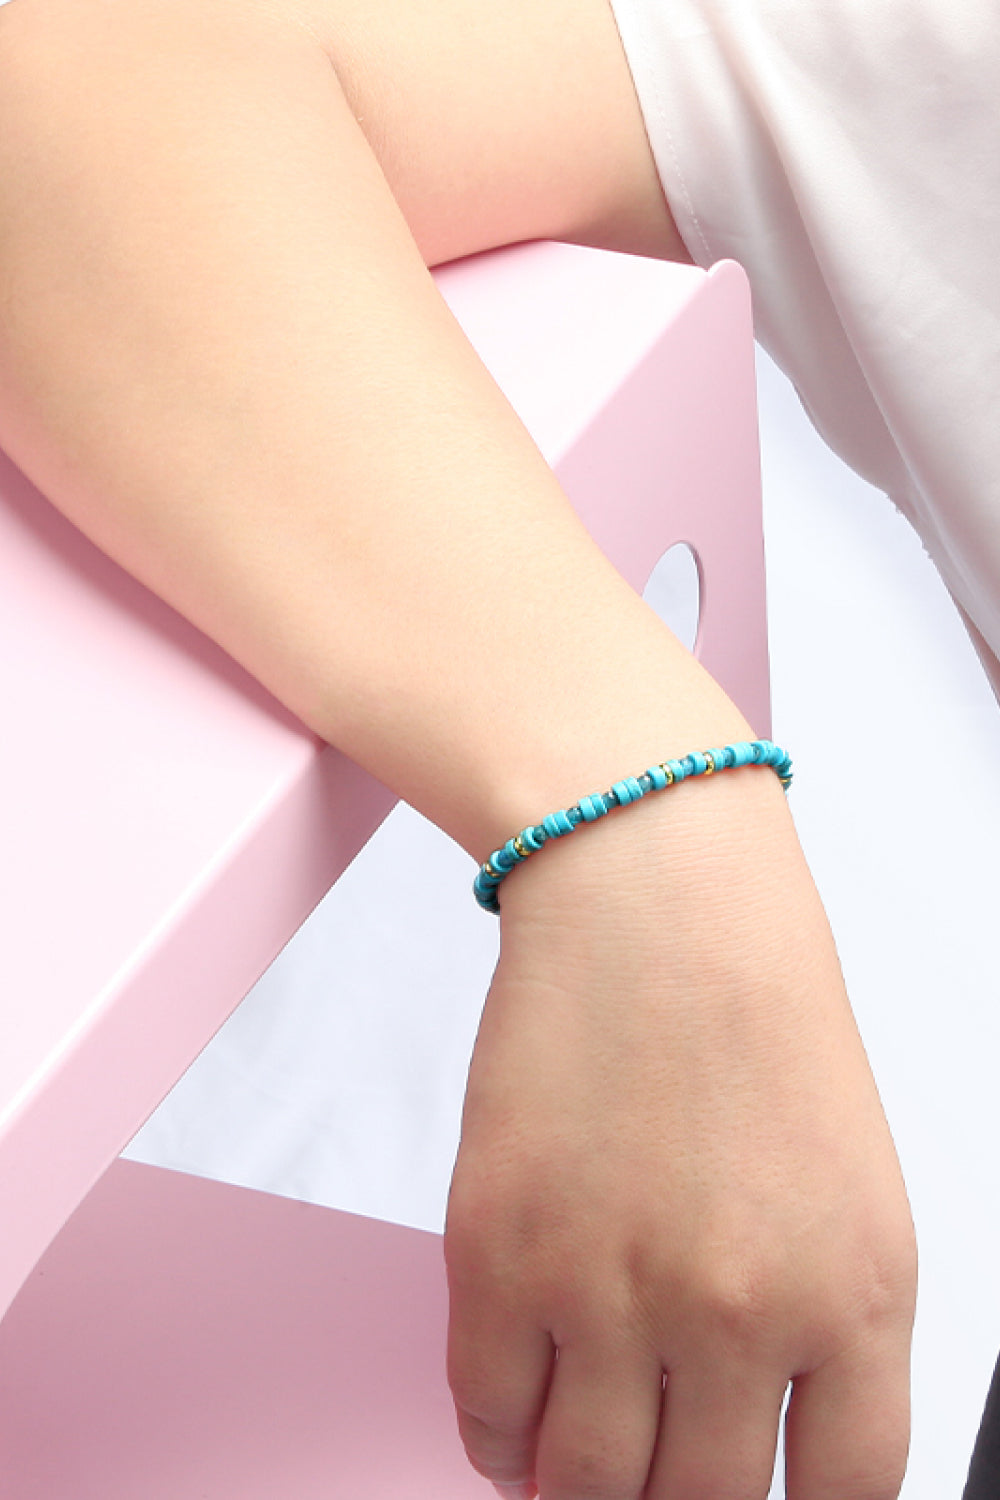 Turquoise Copper Bracelet - Kawaii Stop - 18K Gold-Plated, Adjustable Fit, Artistic Craftsmanship, Bracelet, Bracelets, Copper Bracelet, Elegant Design, Everyday Charm, Fashion Accessories, Fashion Statement, H.S, Natural Beauty, Nature-Inspired Jewelry, Personalized Style, Premium Quality, Ship From Overseas, Timeless Elegance, Turquoise Stone